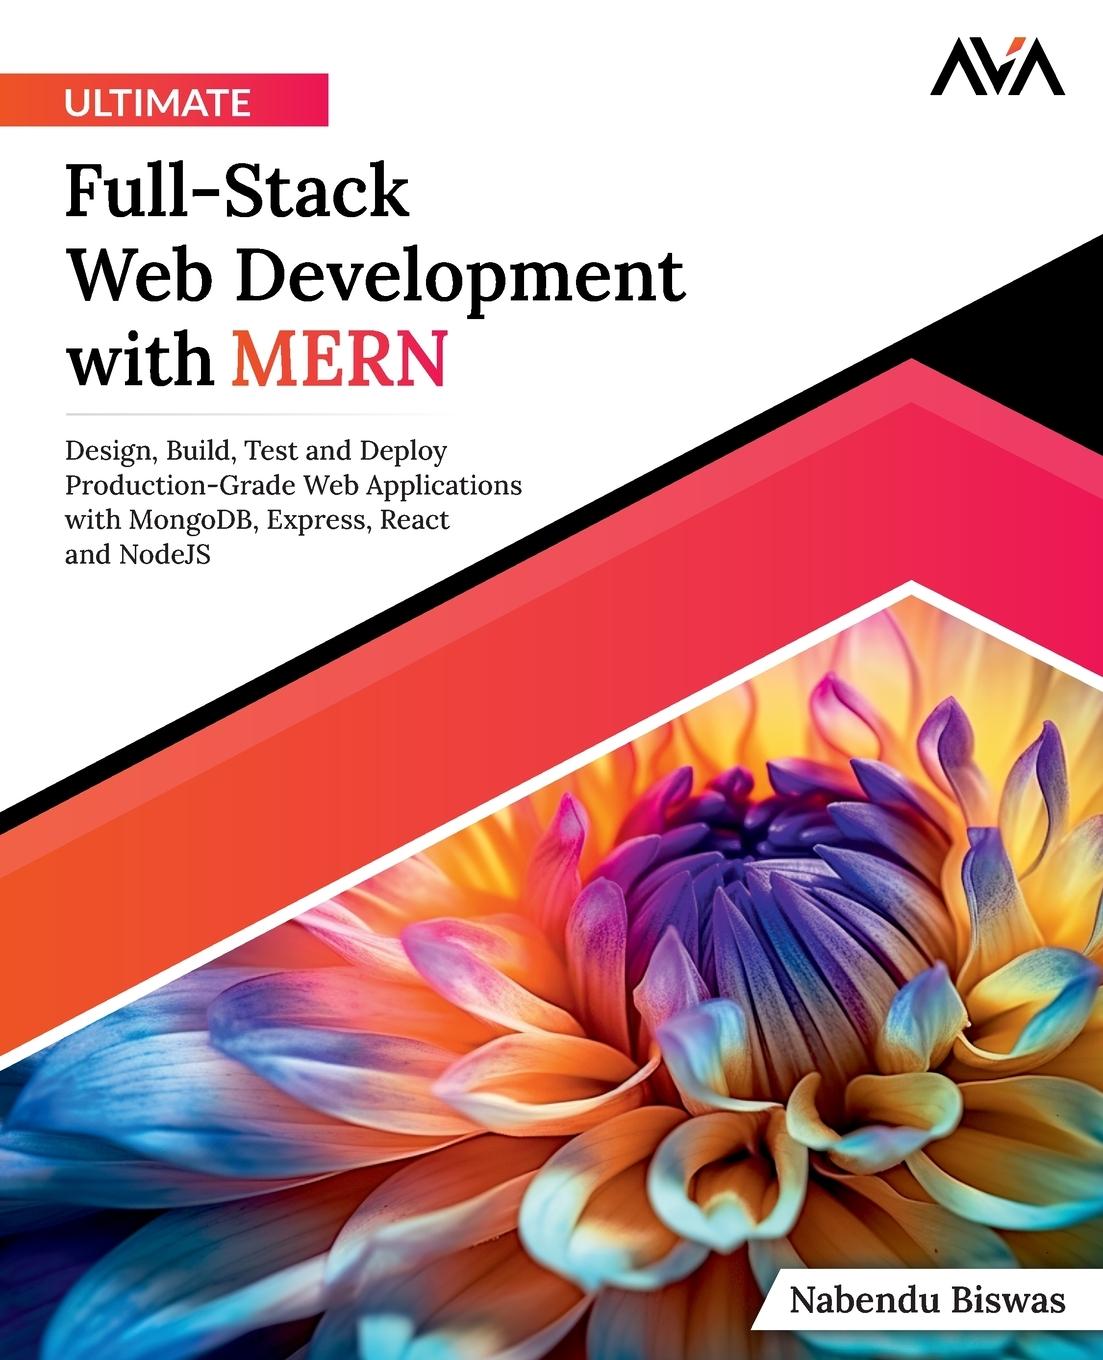 Book Ultimate Full-Stack Web Development with MERN 